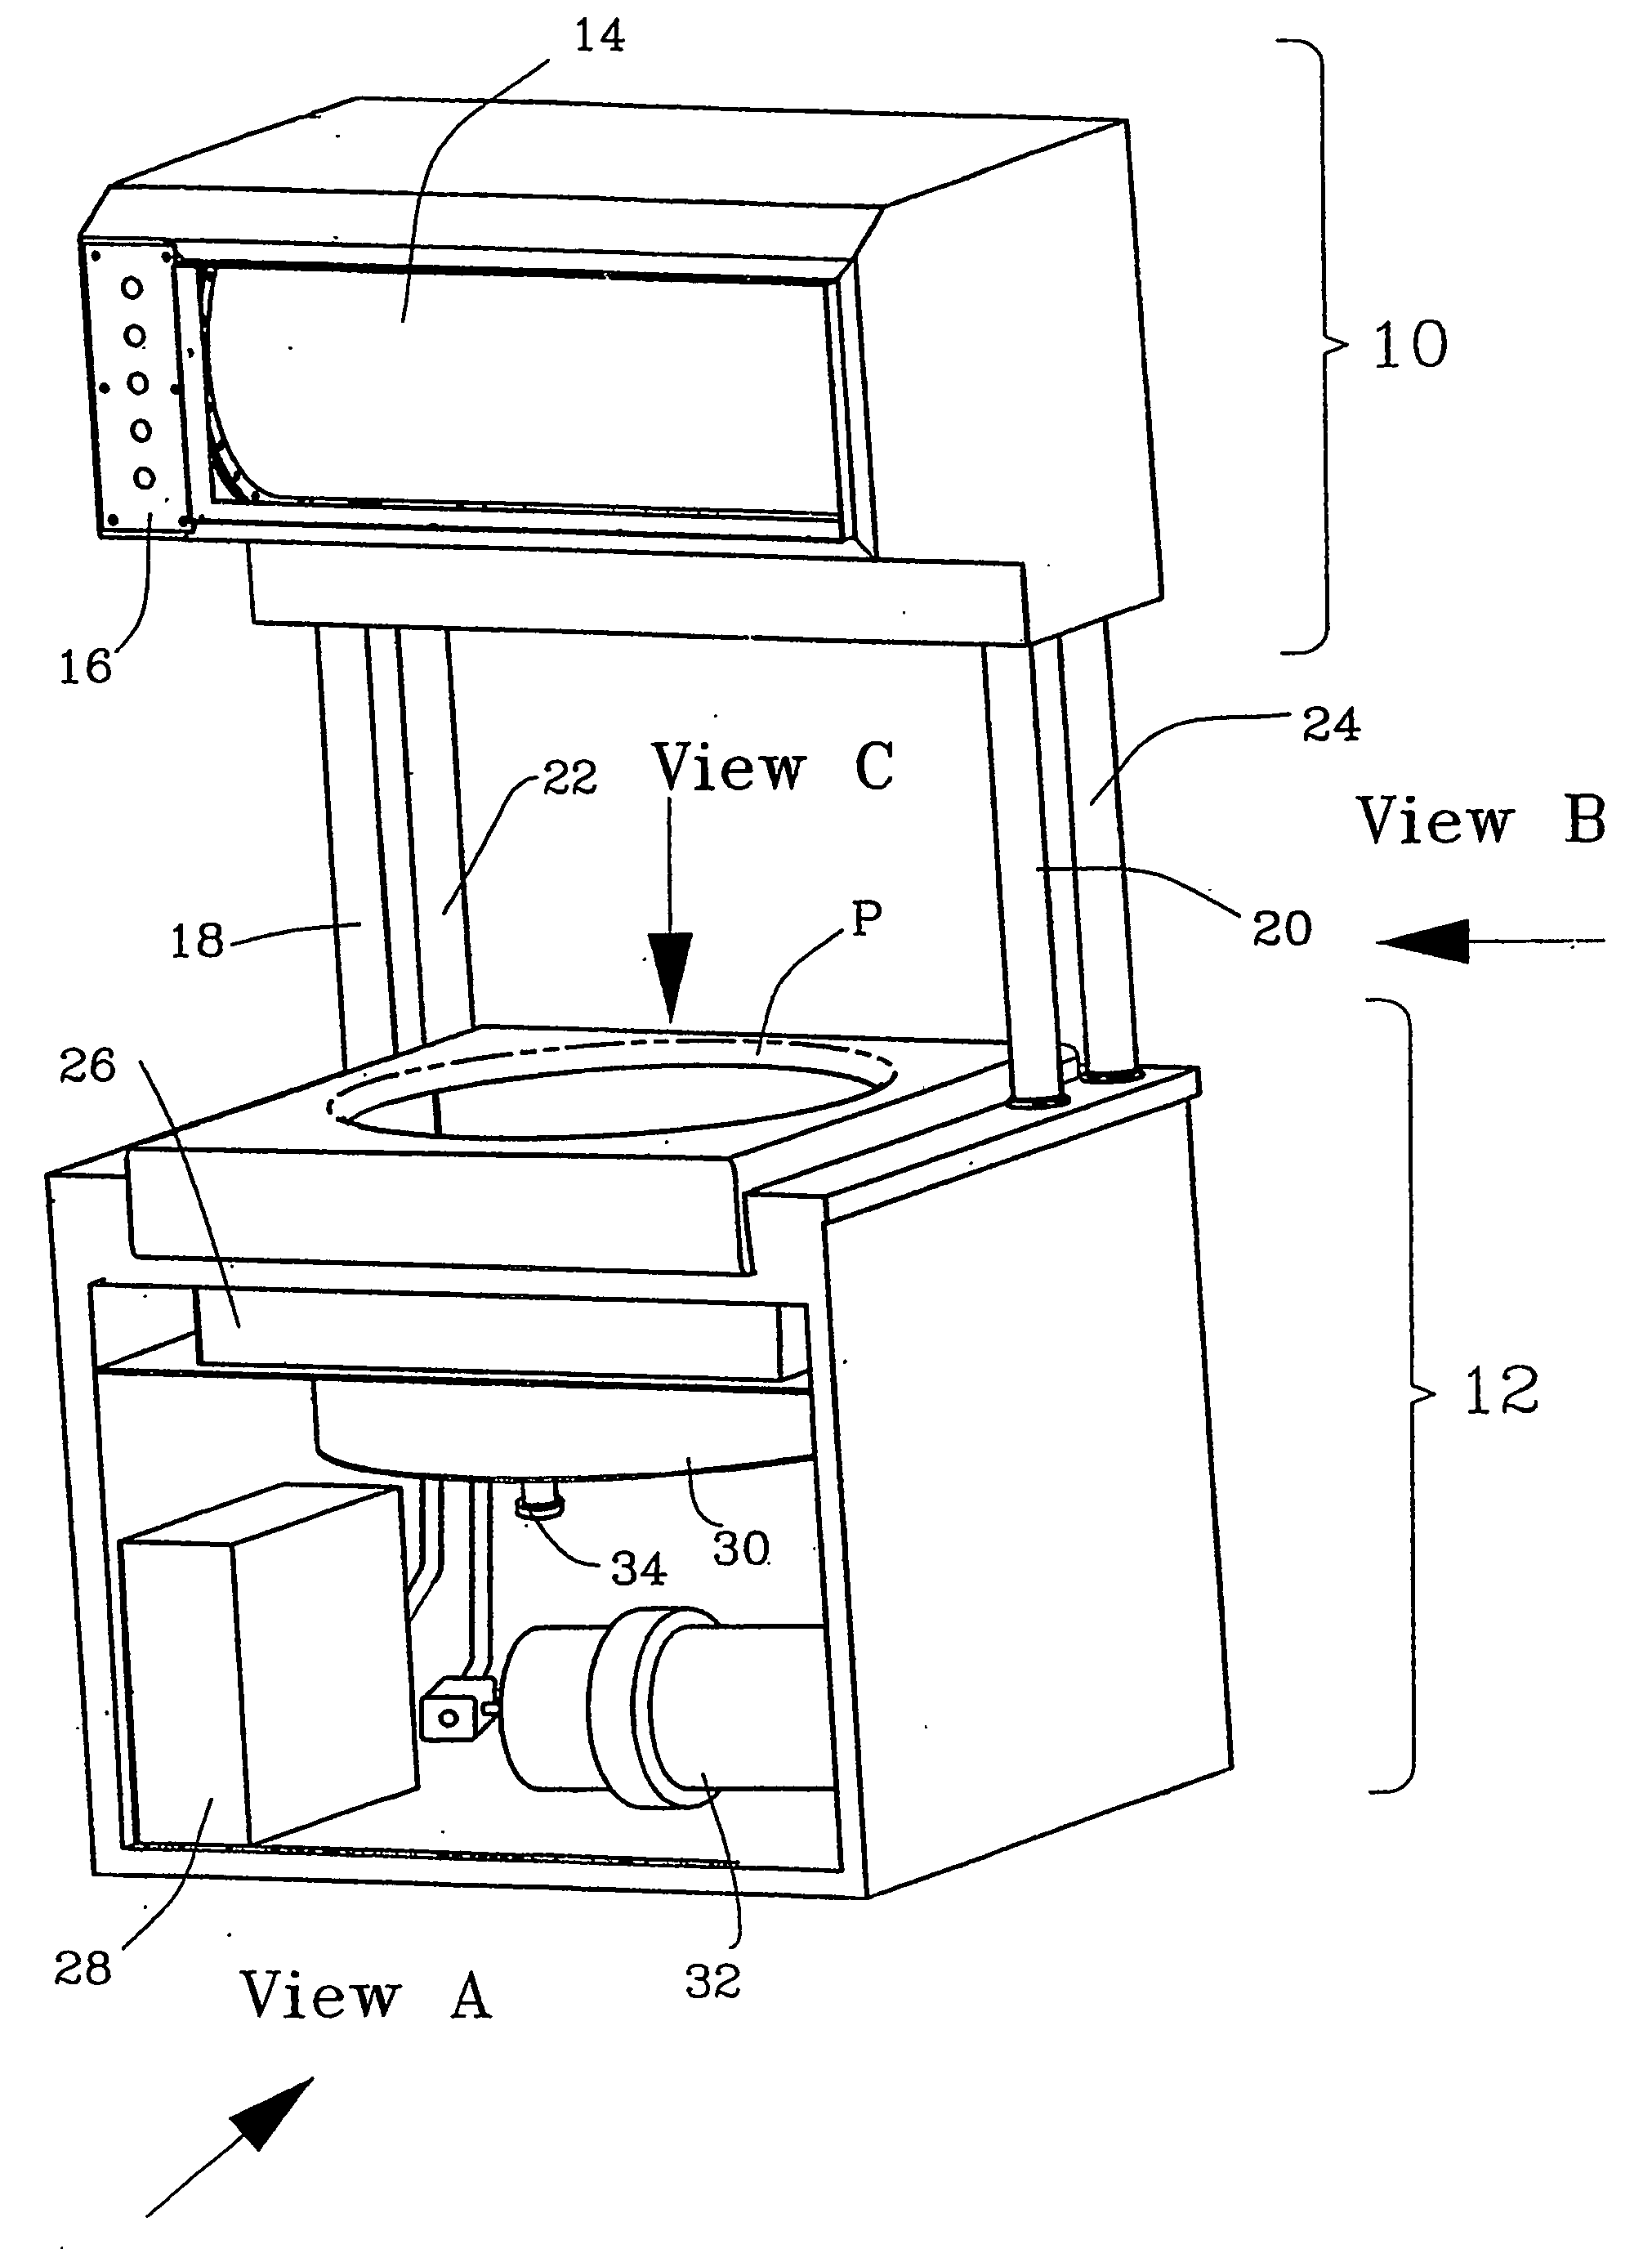 Ultrasonic cleaning and washing apparatus for fruits and vegetables and a method for the use thereof